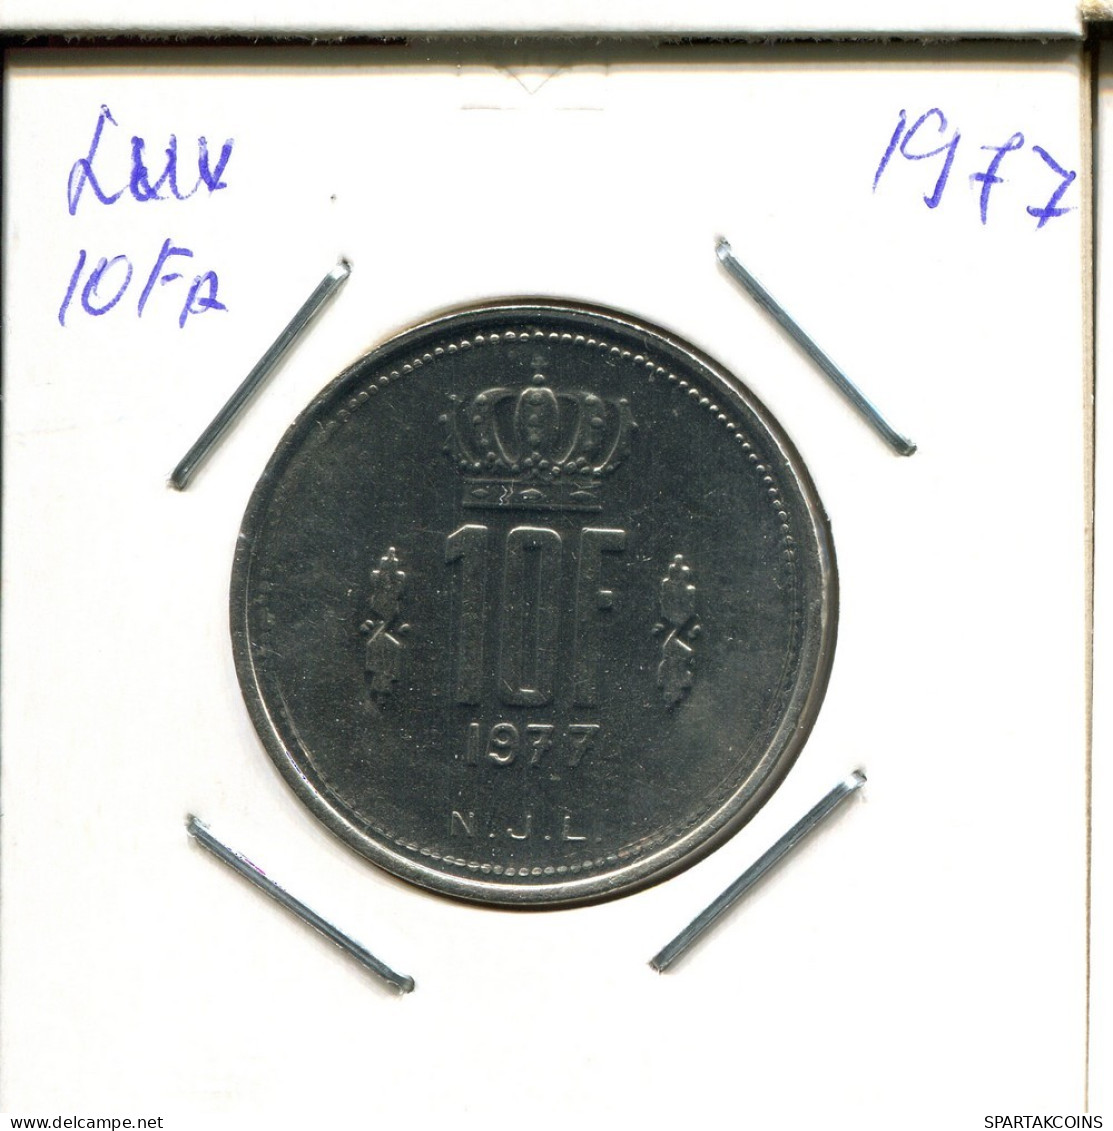 10 FRANCS 1977 LUXEMBOURG Coin #AT242.U.A - Luxemburg